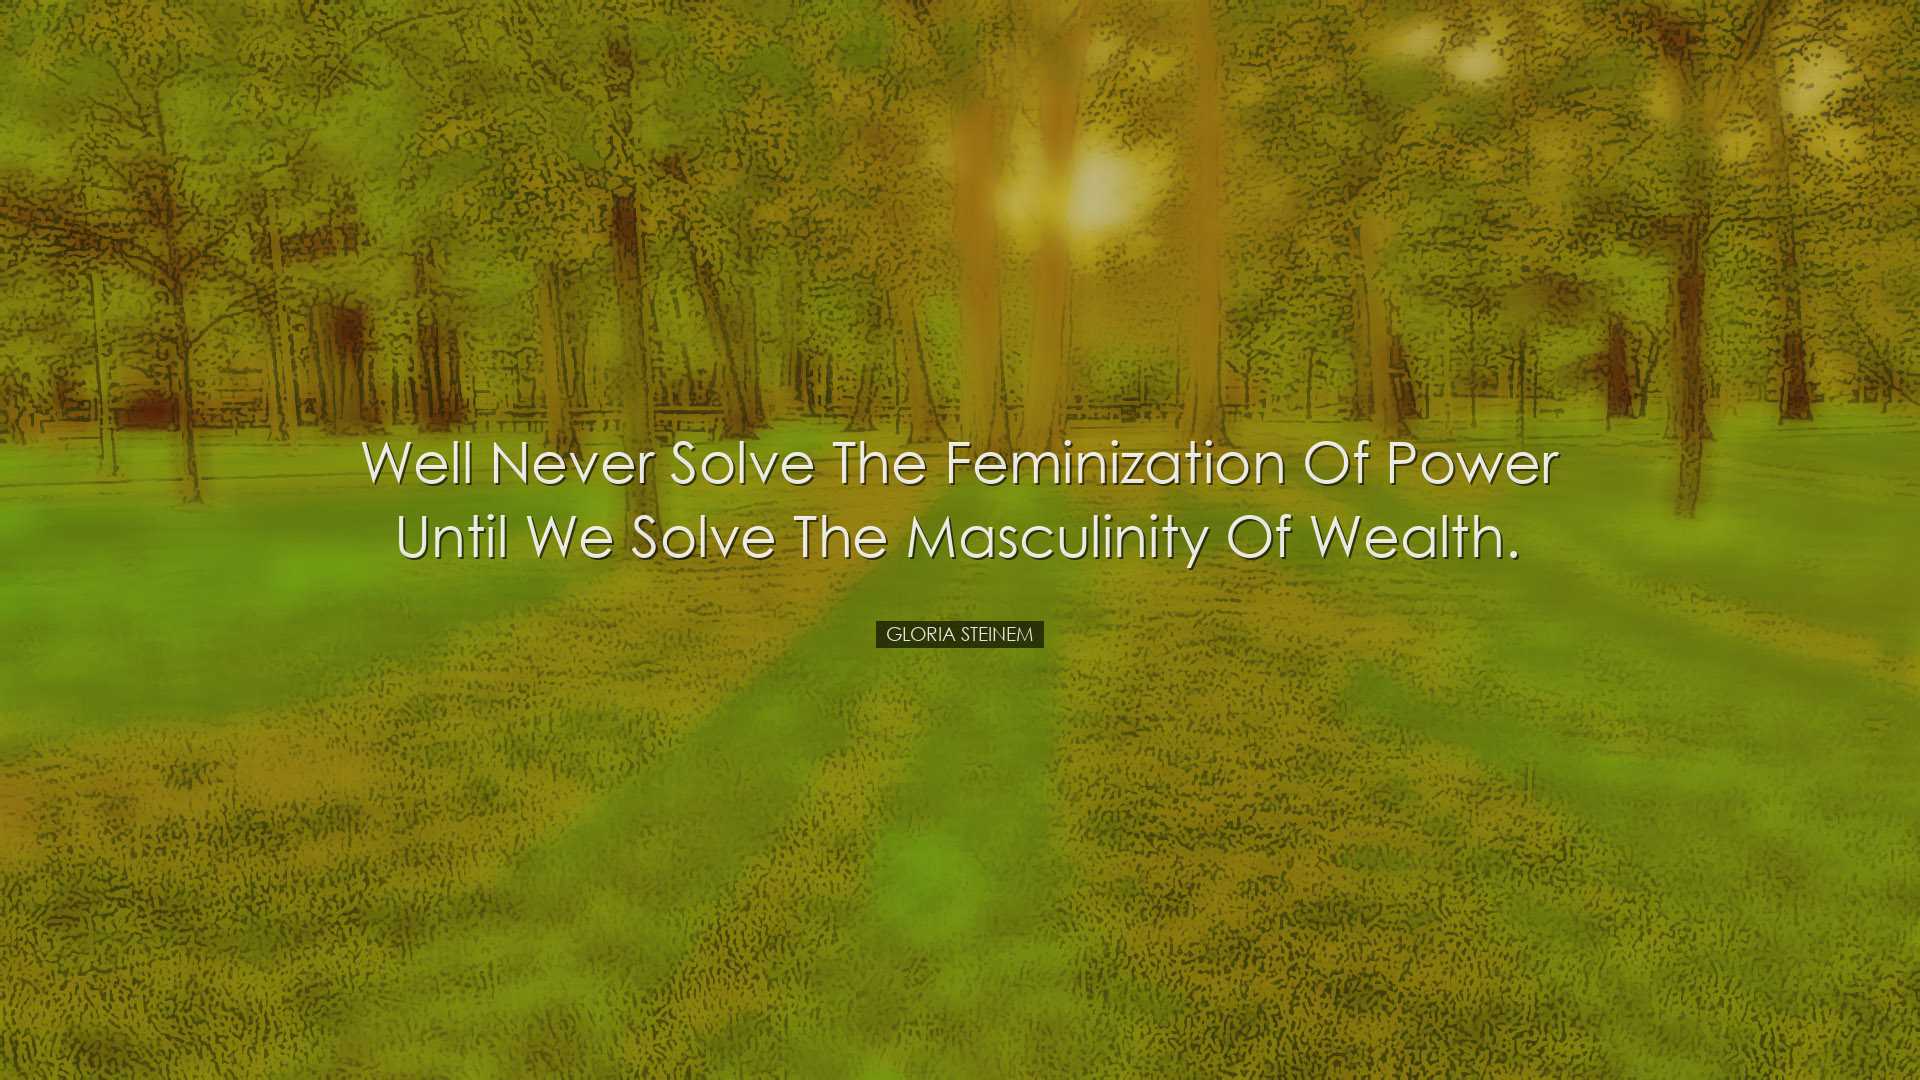 Well never solve the feminization of power until we solve the masc